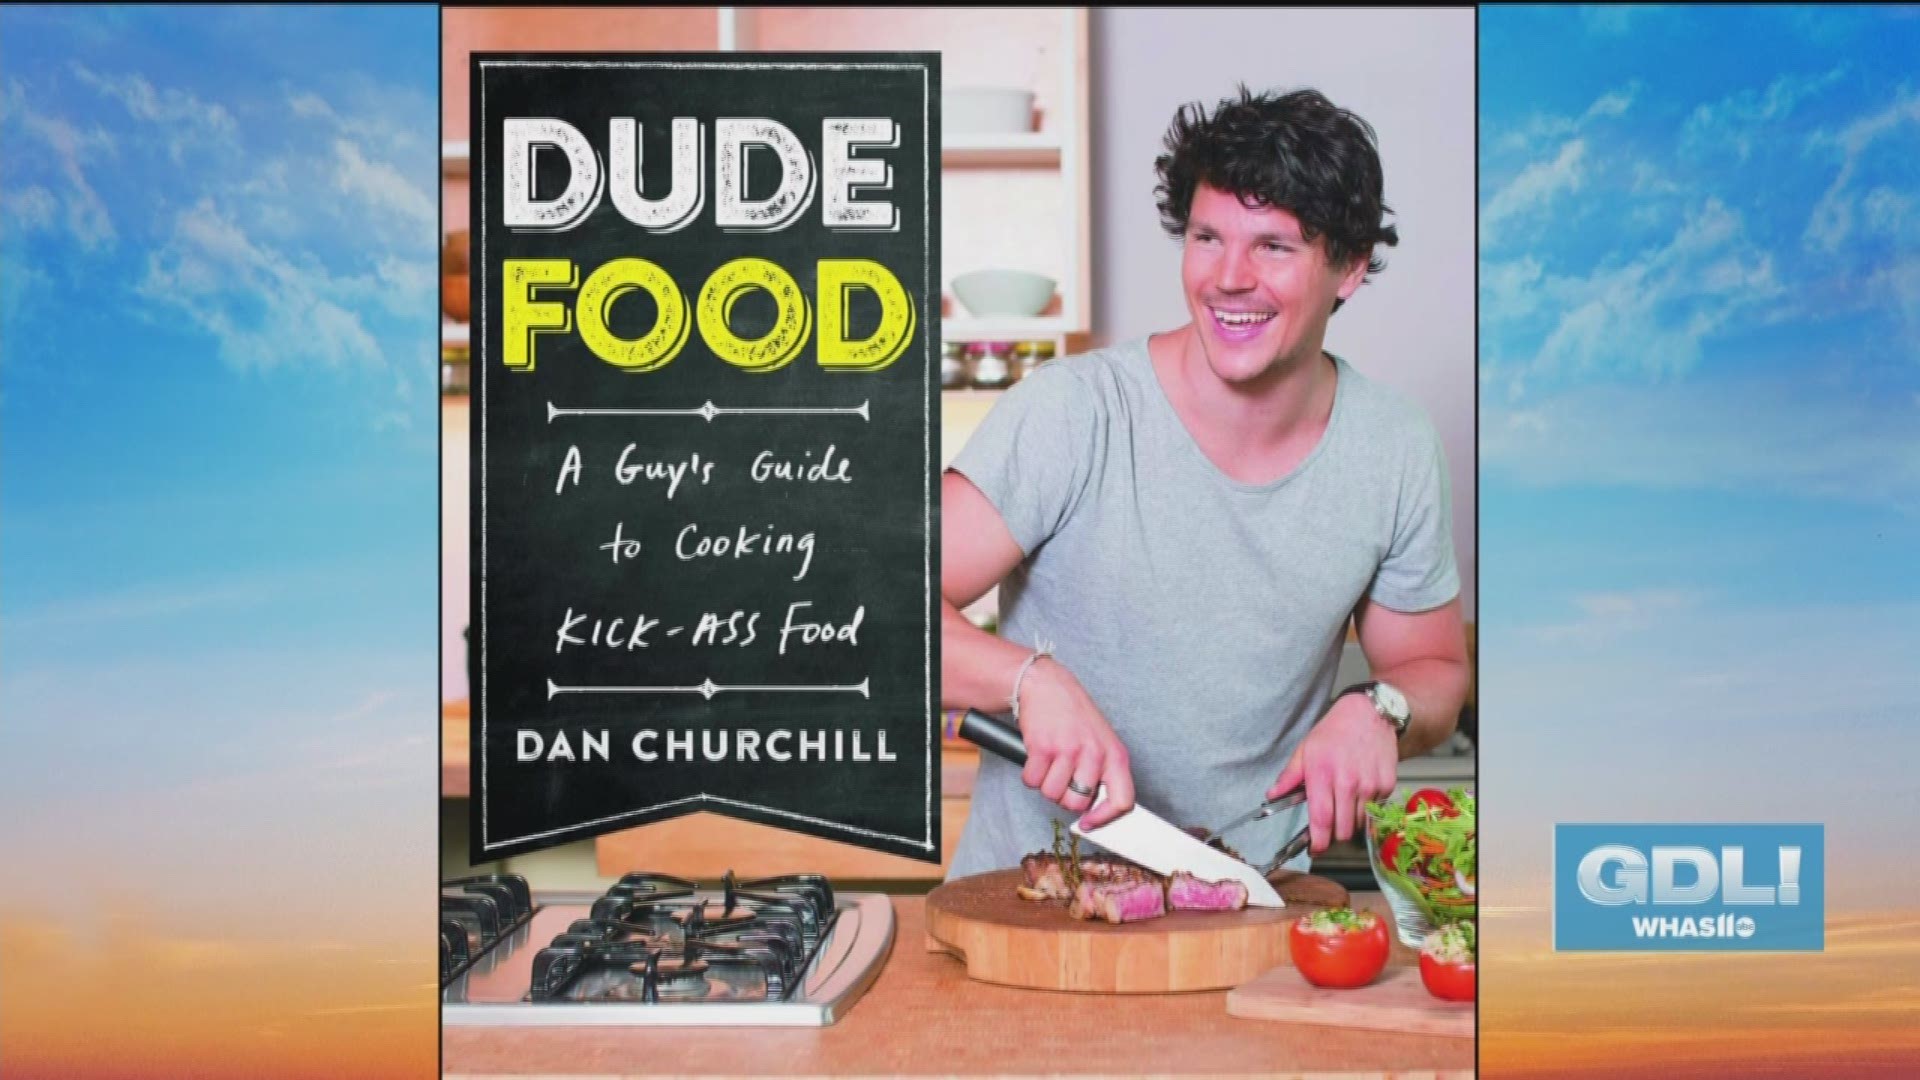 Dan Churchill competed on Australia's food competition MasterChef, wrote a cookbook, opened a restaurant in New York and is now representing Hilton Garden Inns. He stopped by Great Day Live to cook up some Dude Food.